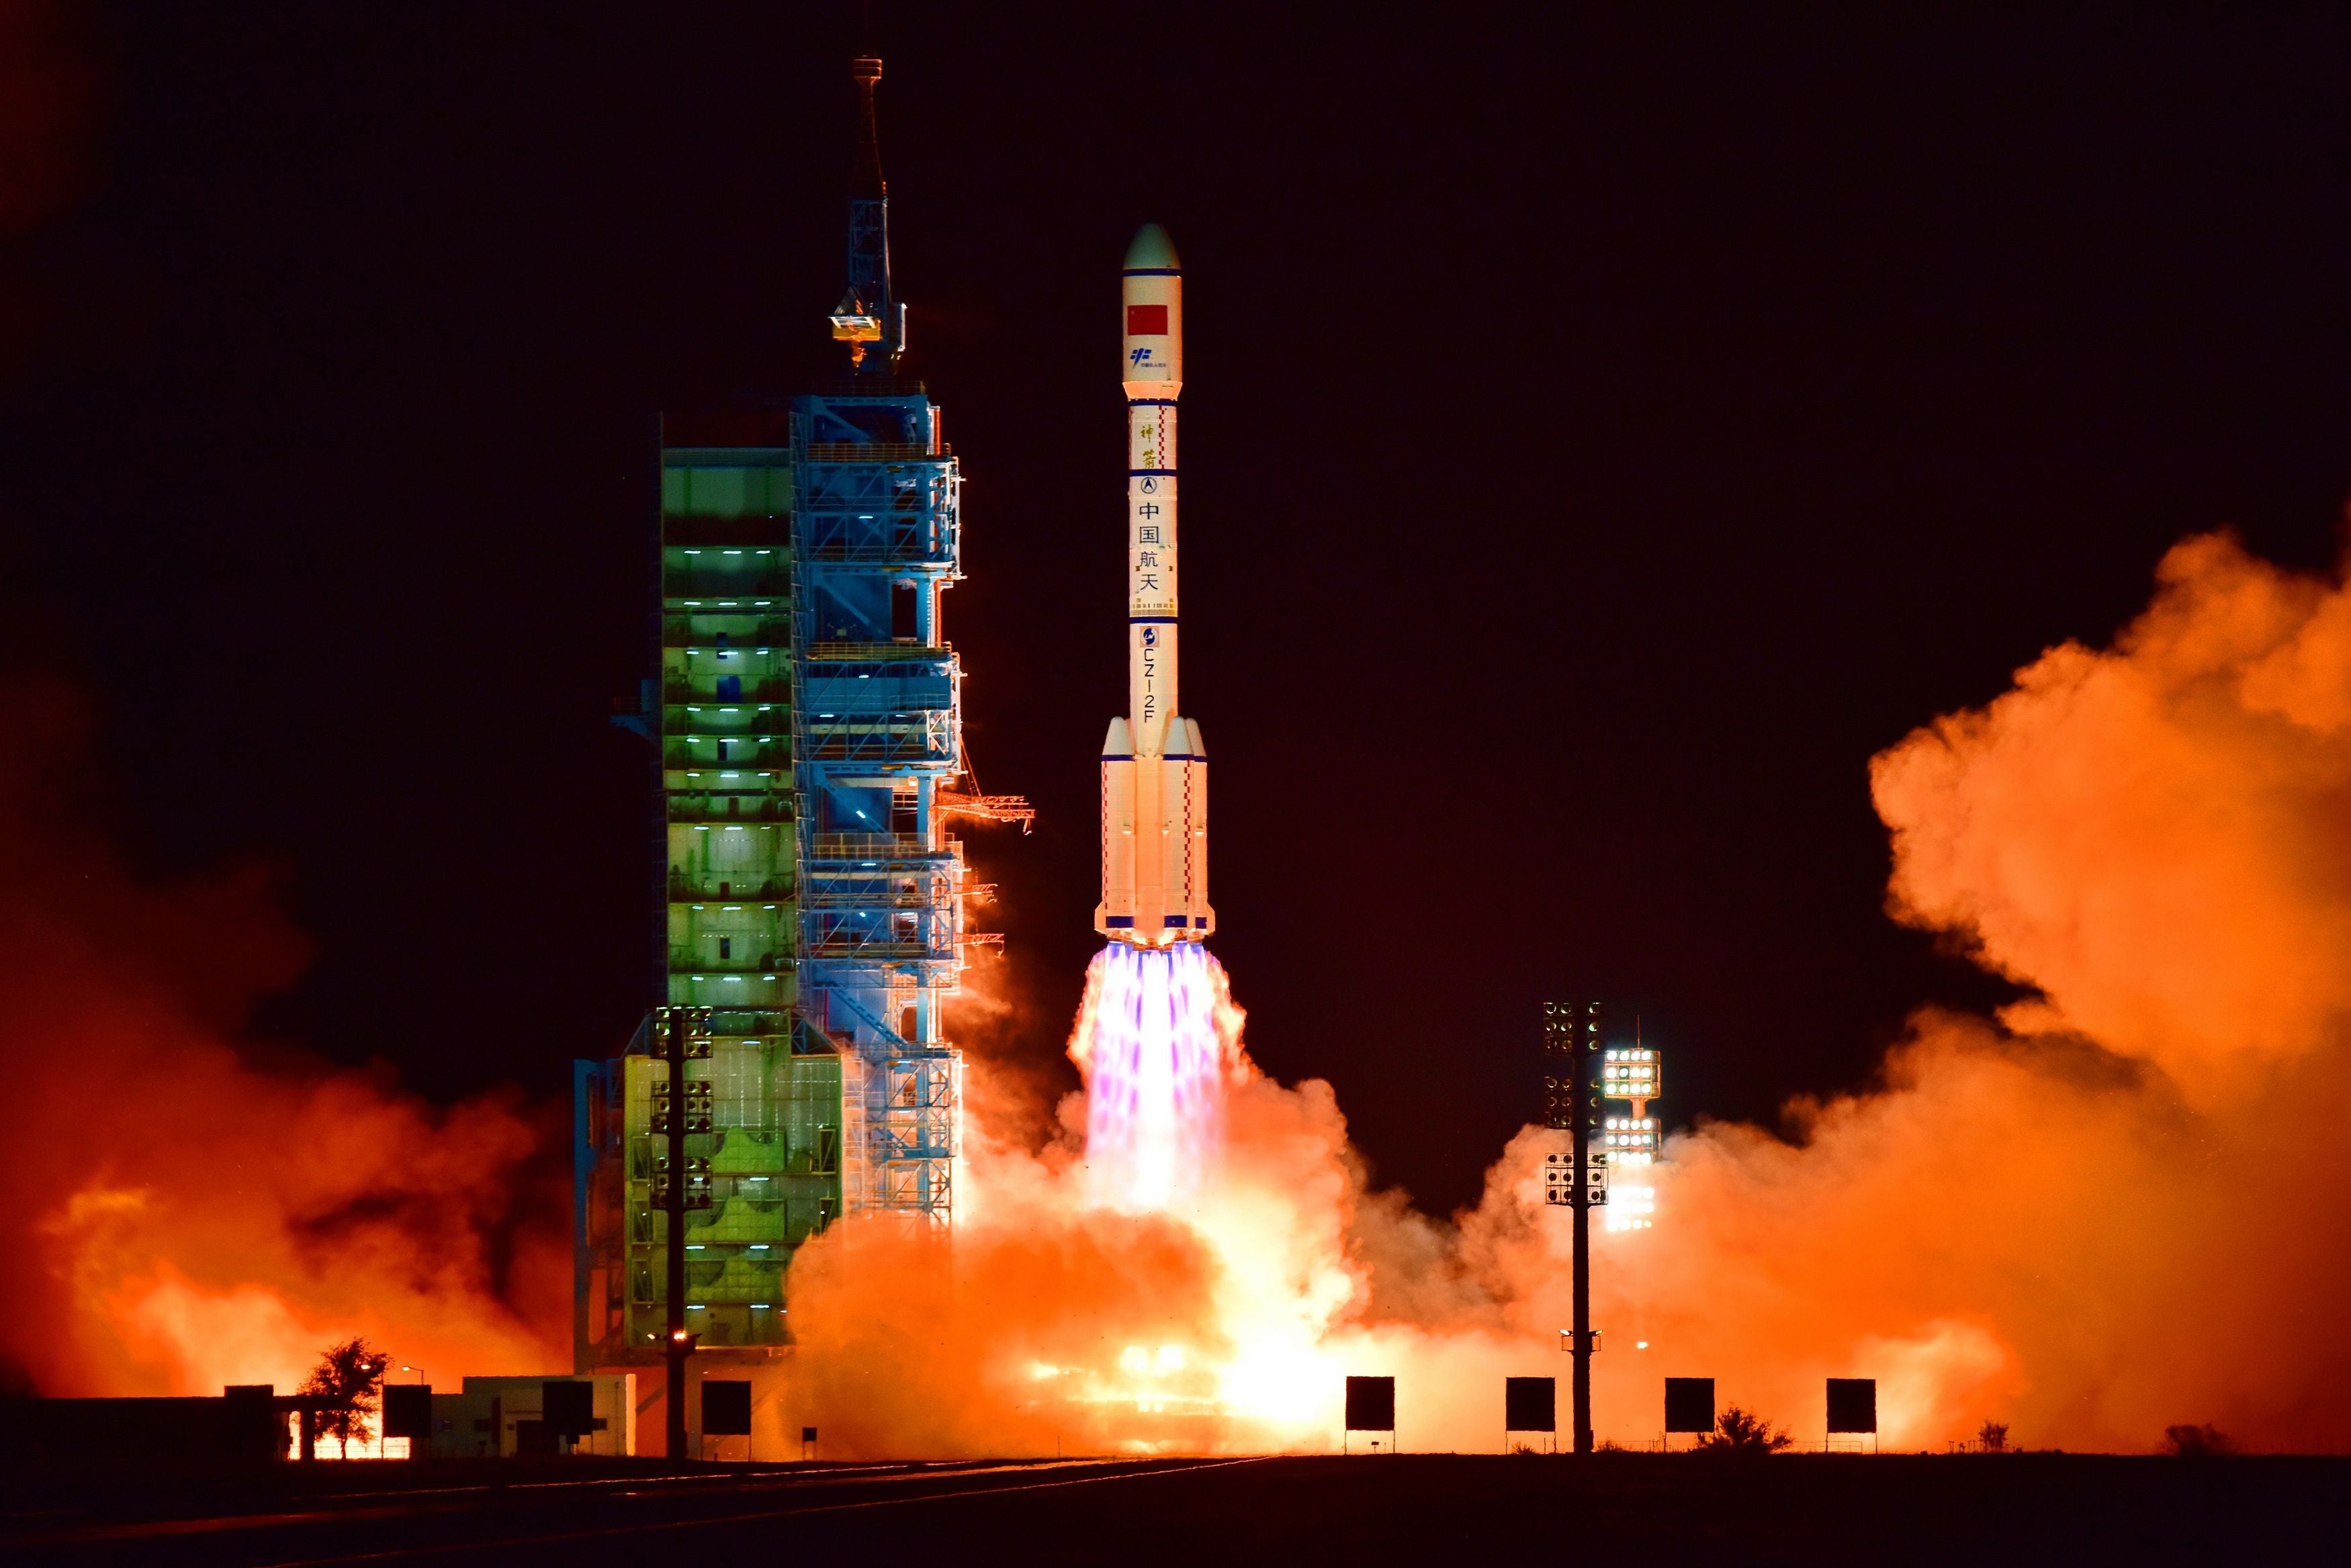 File. China’s Tiangong 2 space lab is launched on a Long March-2F rocket from the Jiuquan Satellite Launch Center in the Gobi Desert, in China’s Gansu province, on 15 September 2016. Elon Musk, the owner of Tesla is facing a massive backlash on Chinese social media after it came to light that Beijing had to take measures to avoid its space station from colliding with Musk’s satellites twice